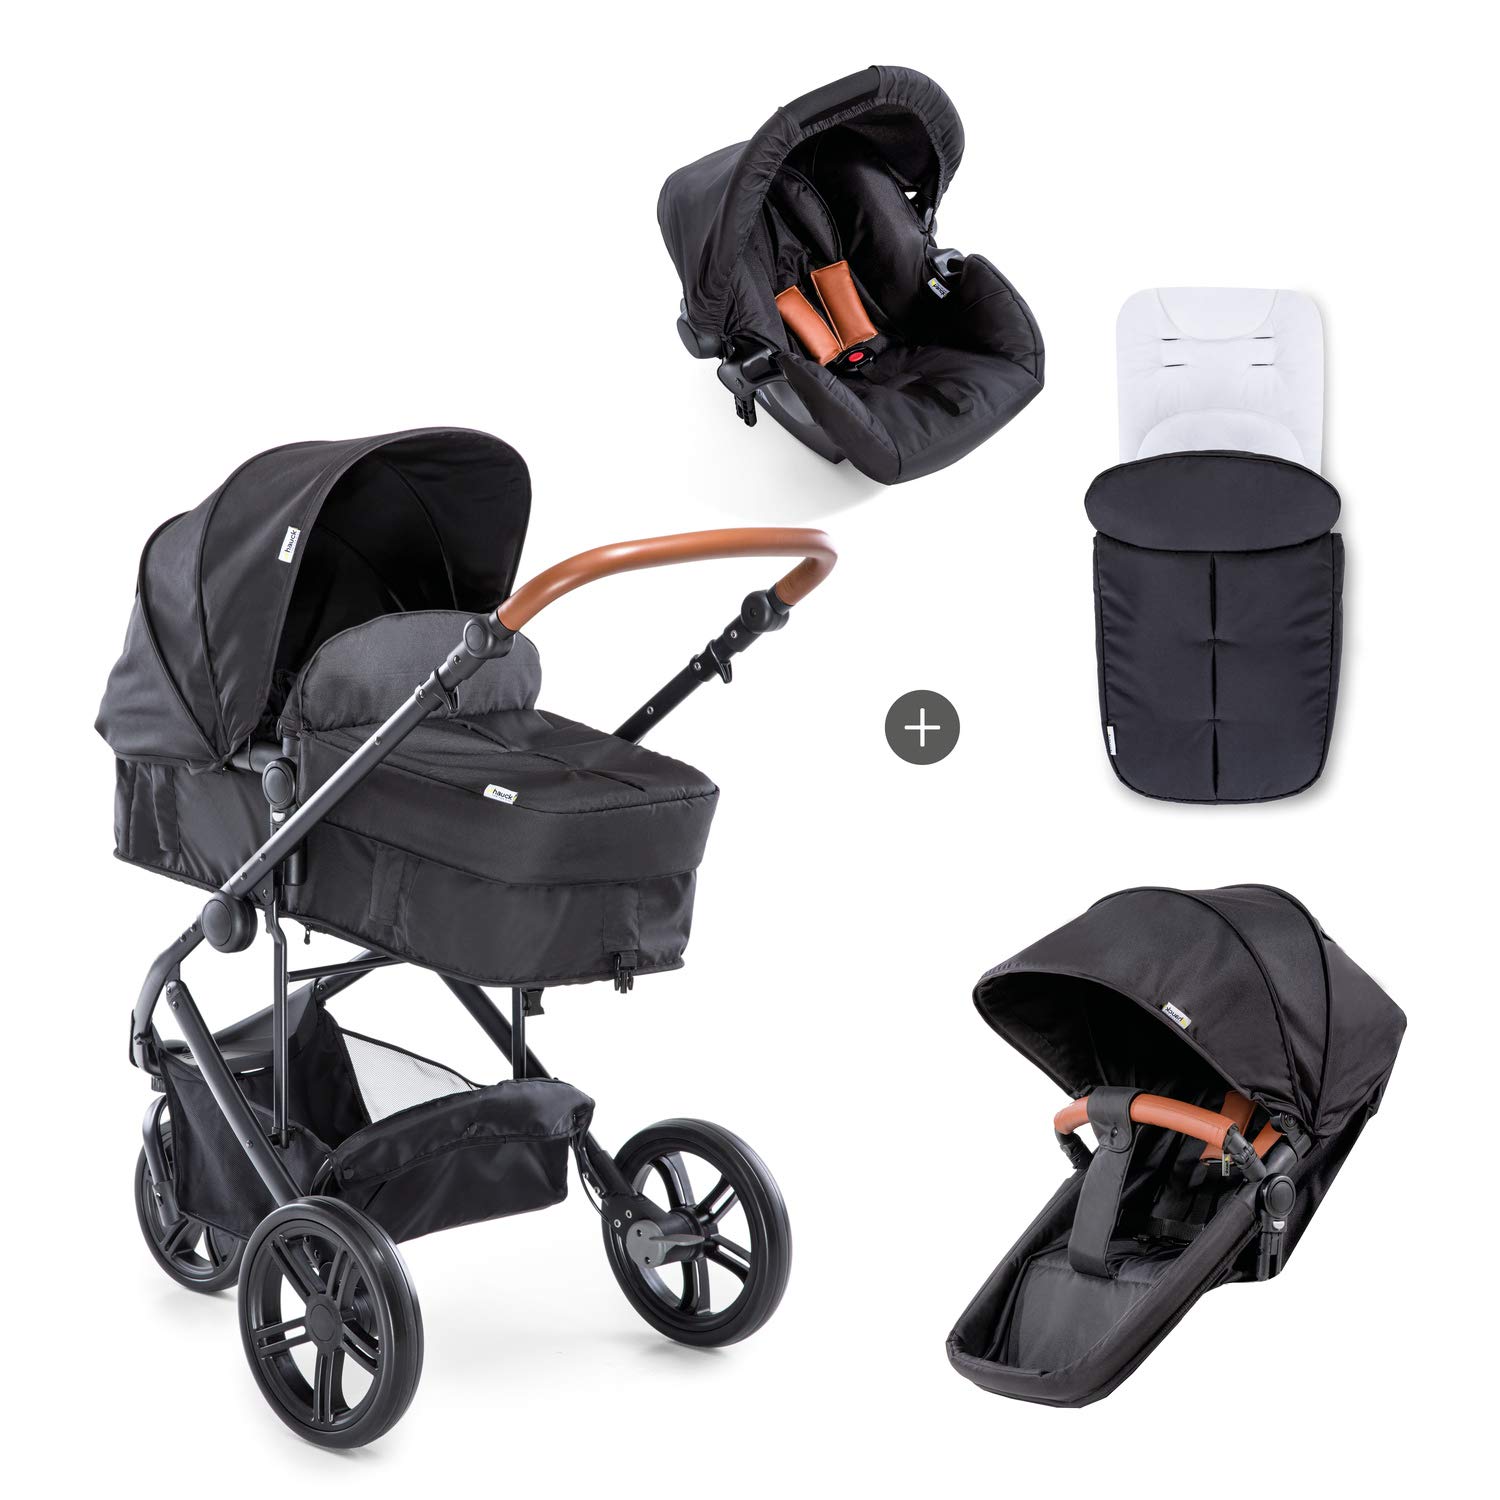 Hauck Pacific 4 Shop N Drive, 6-Piece Combination Lightweight Pushchair Set, Up to 25 kg with Baby Seat, Baby Tub Convertible, Reversible Seat Unit with Leg Cover